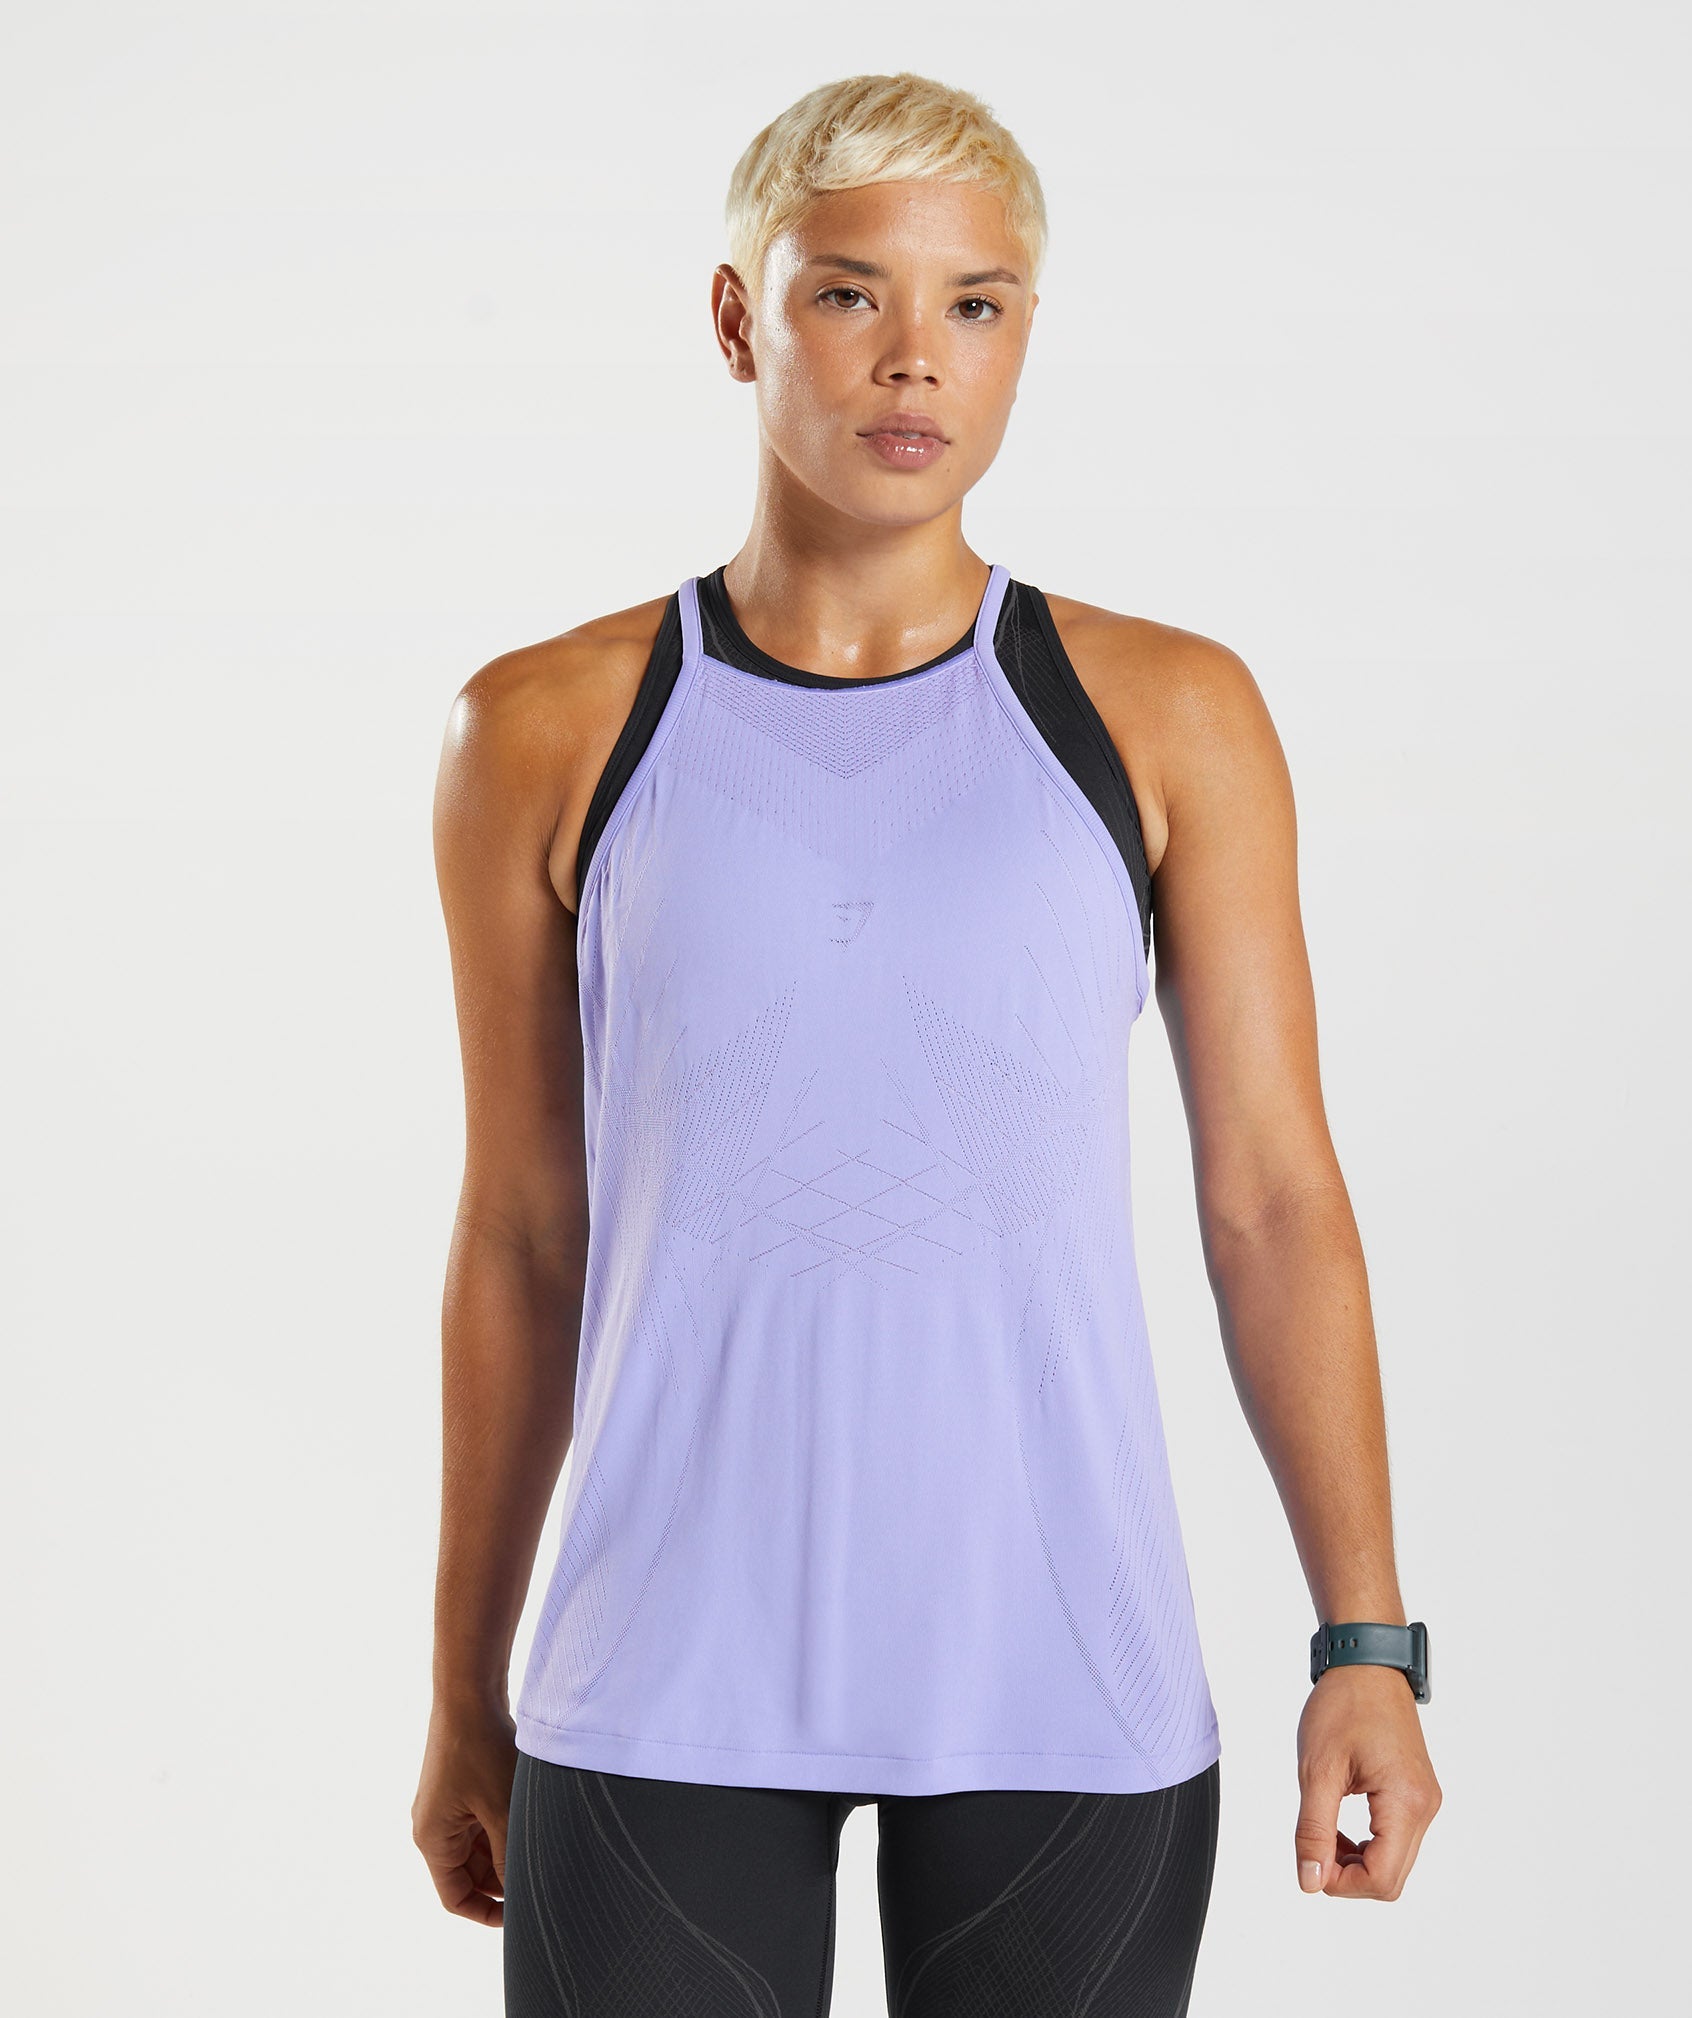 Apex Seamless Tank in Dusted Violet/Digital Violet - view 1